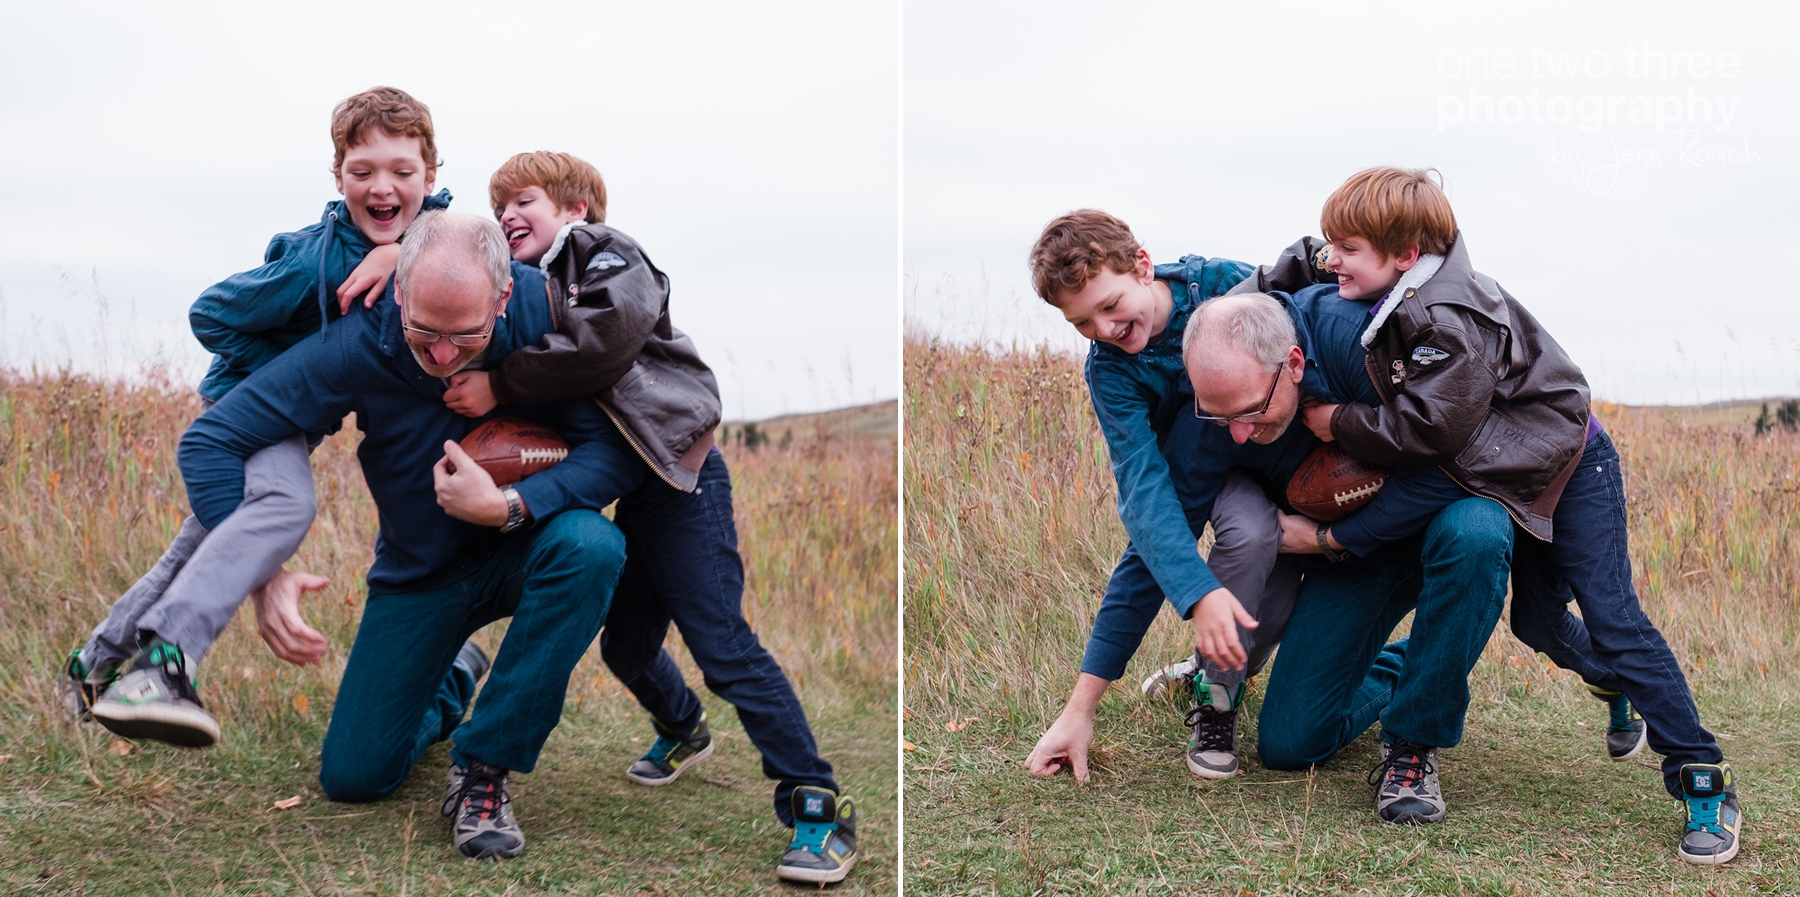 Father and his two sons tackle each other while playing football